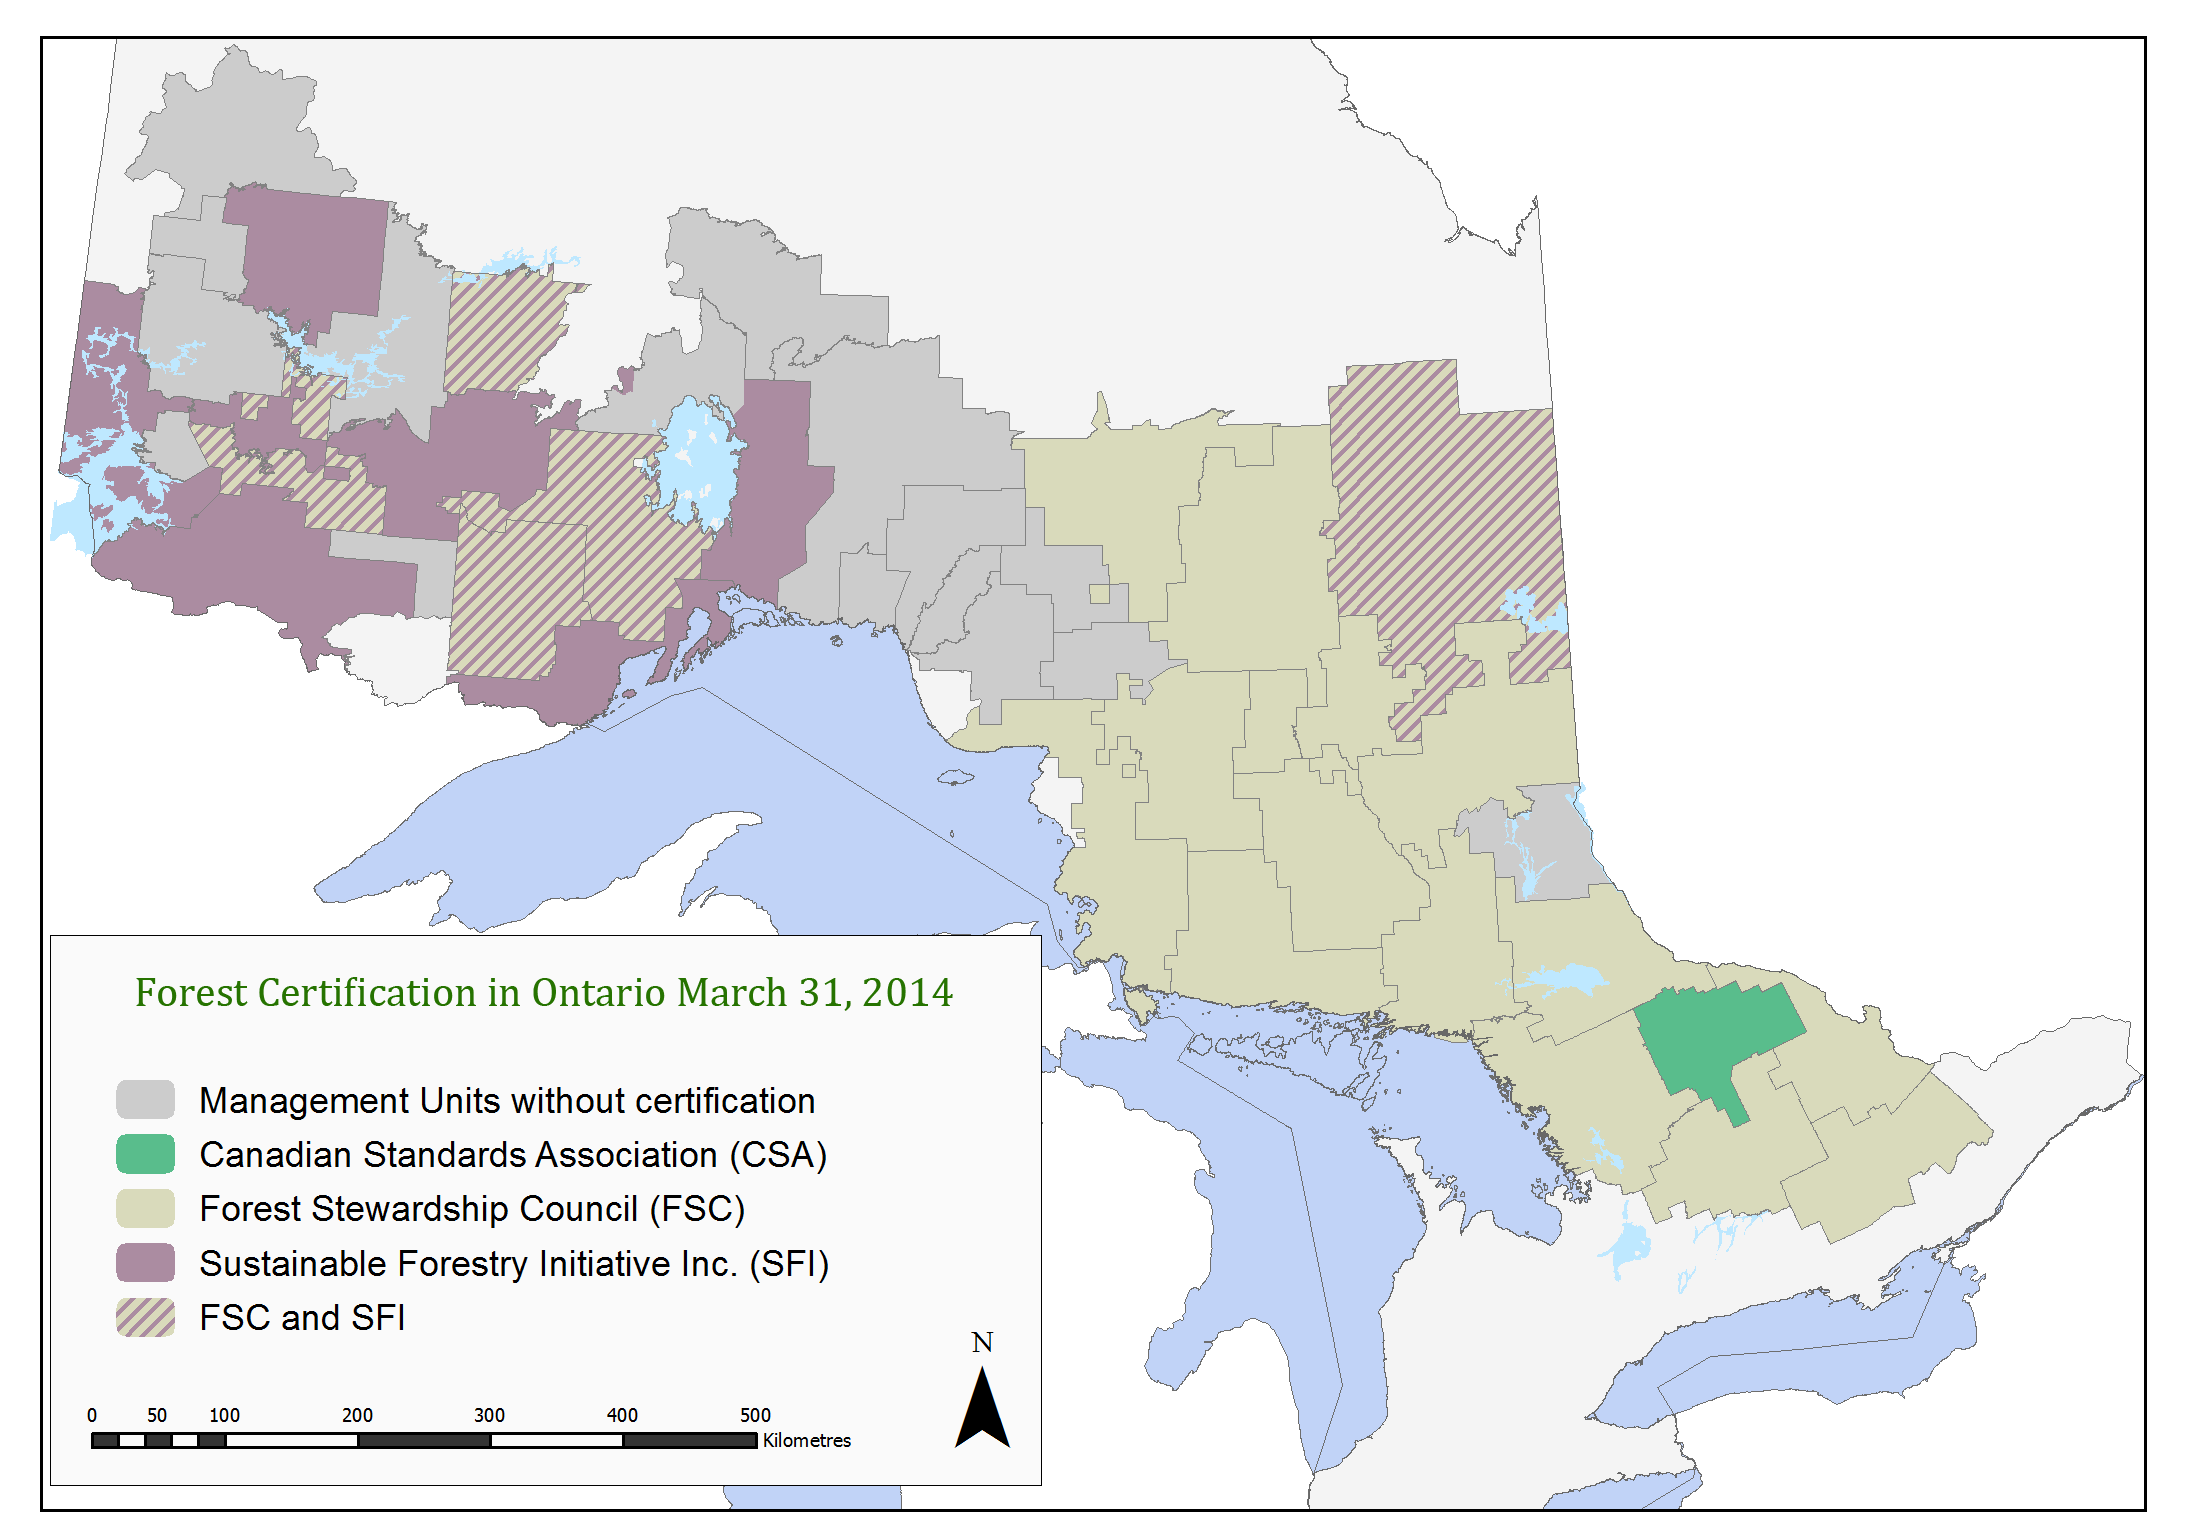 Map showing forest certification within Ontario by certification system for March 2014